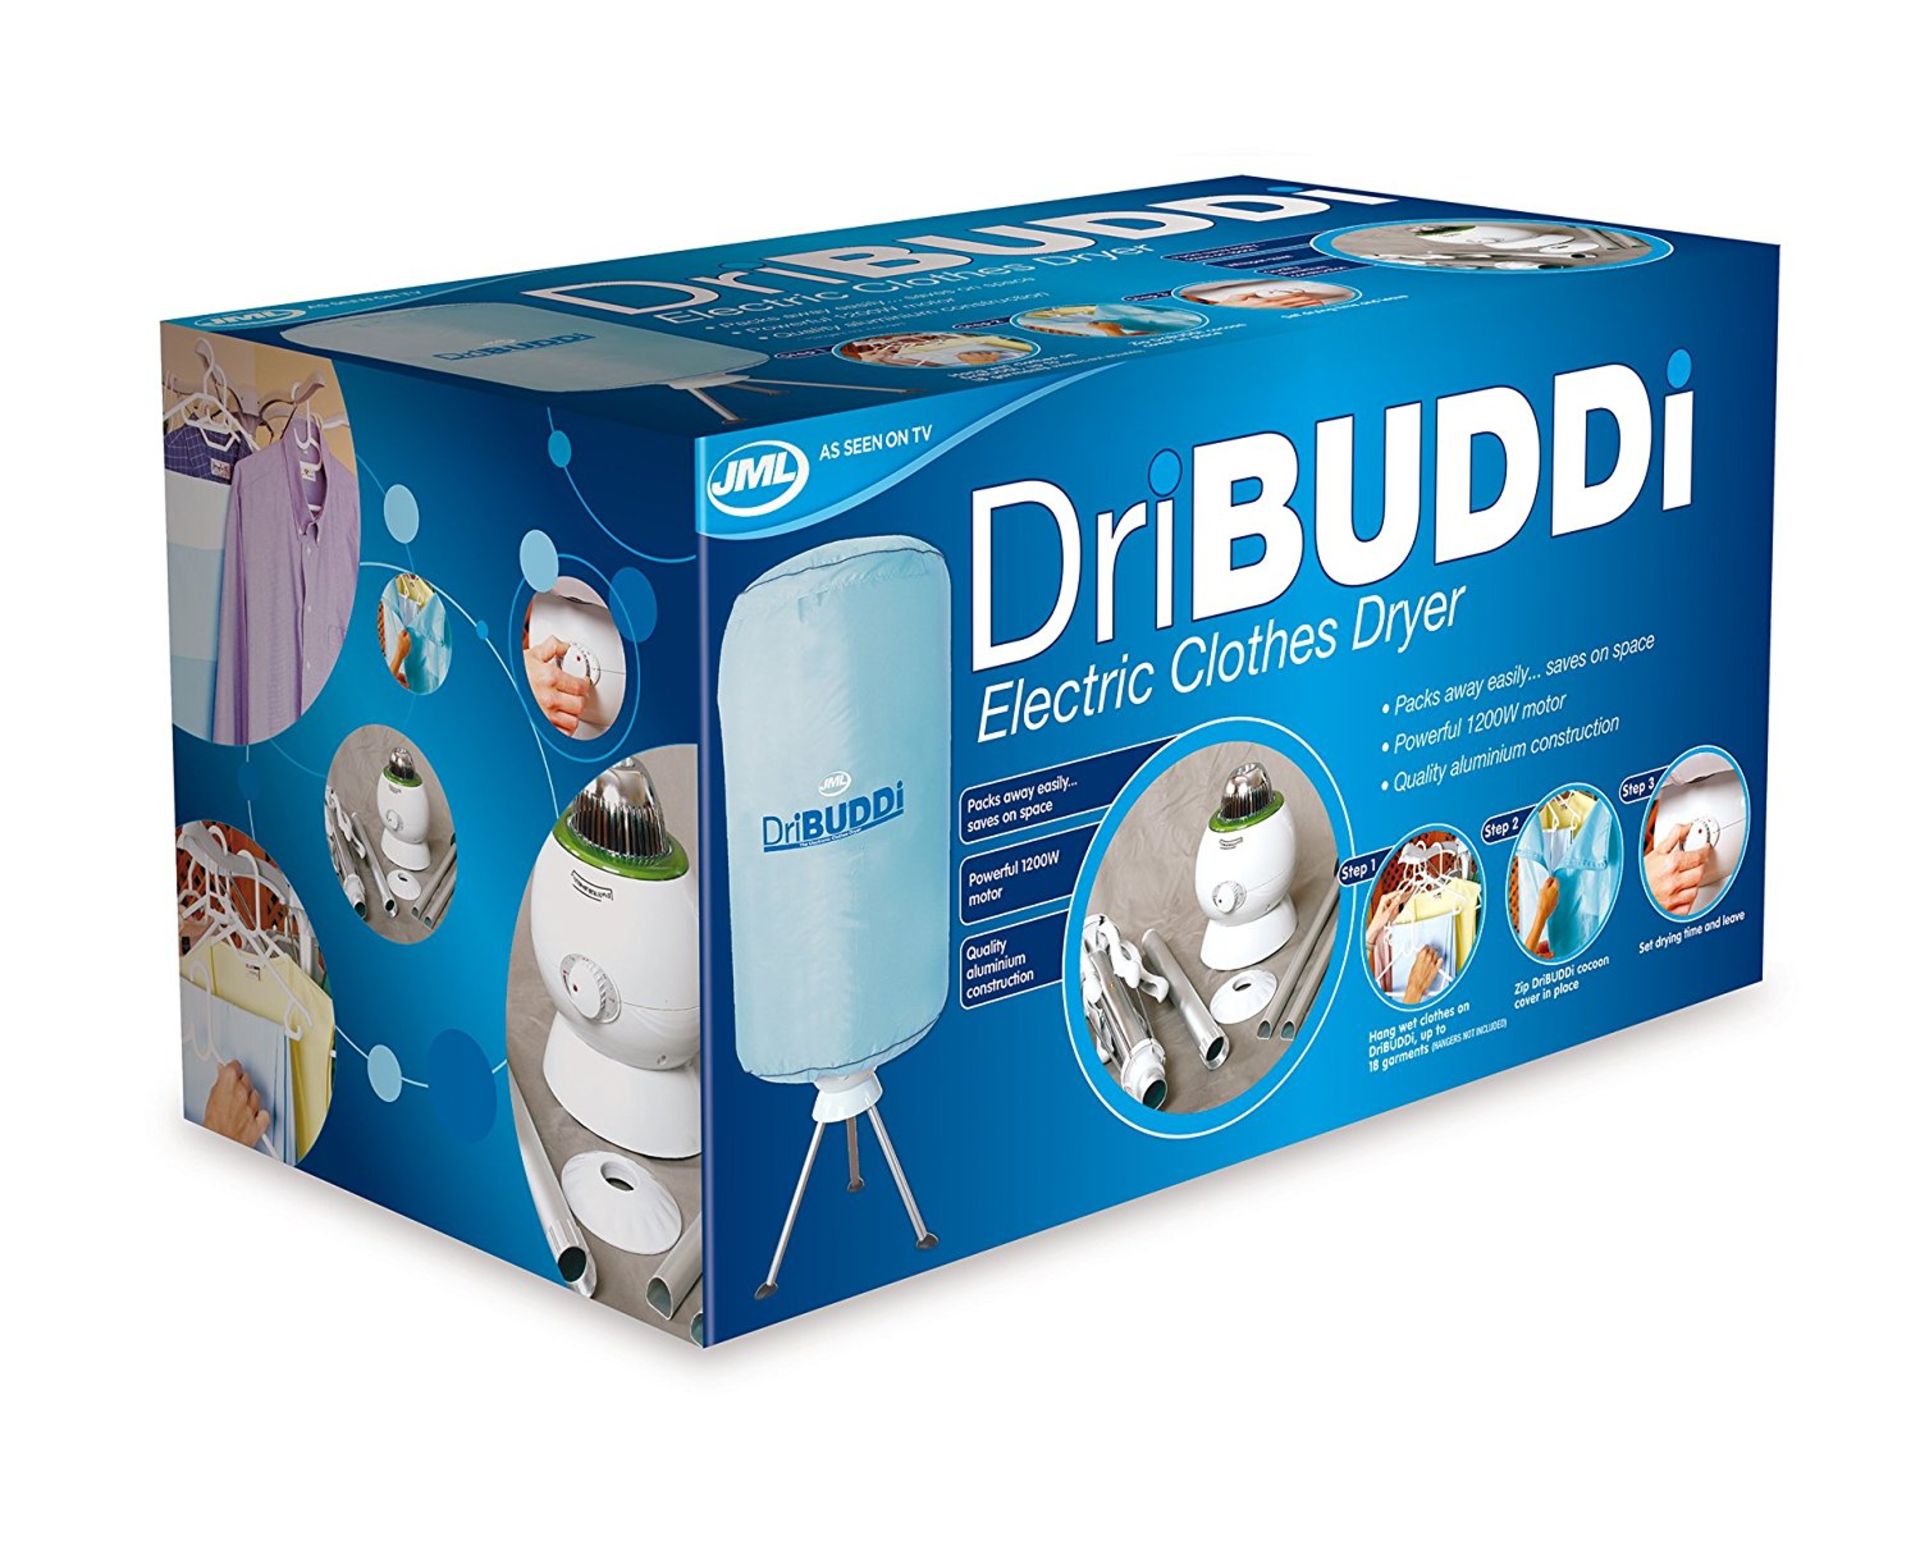 Dri Buddi 1200W - This smart clothes dryer safely but gently dries your clothes using a warm air